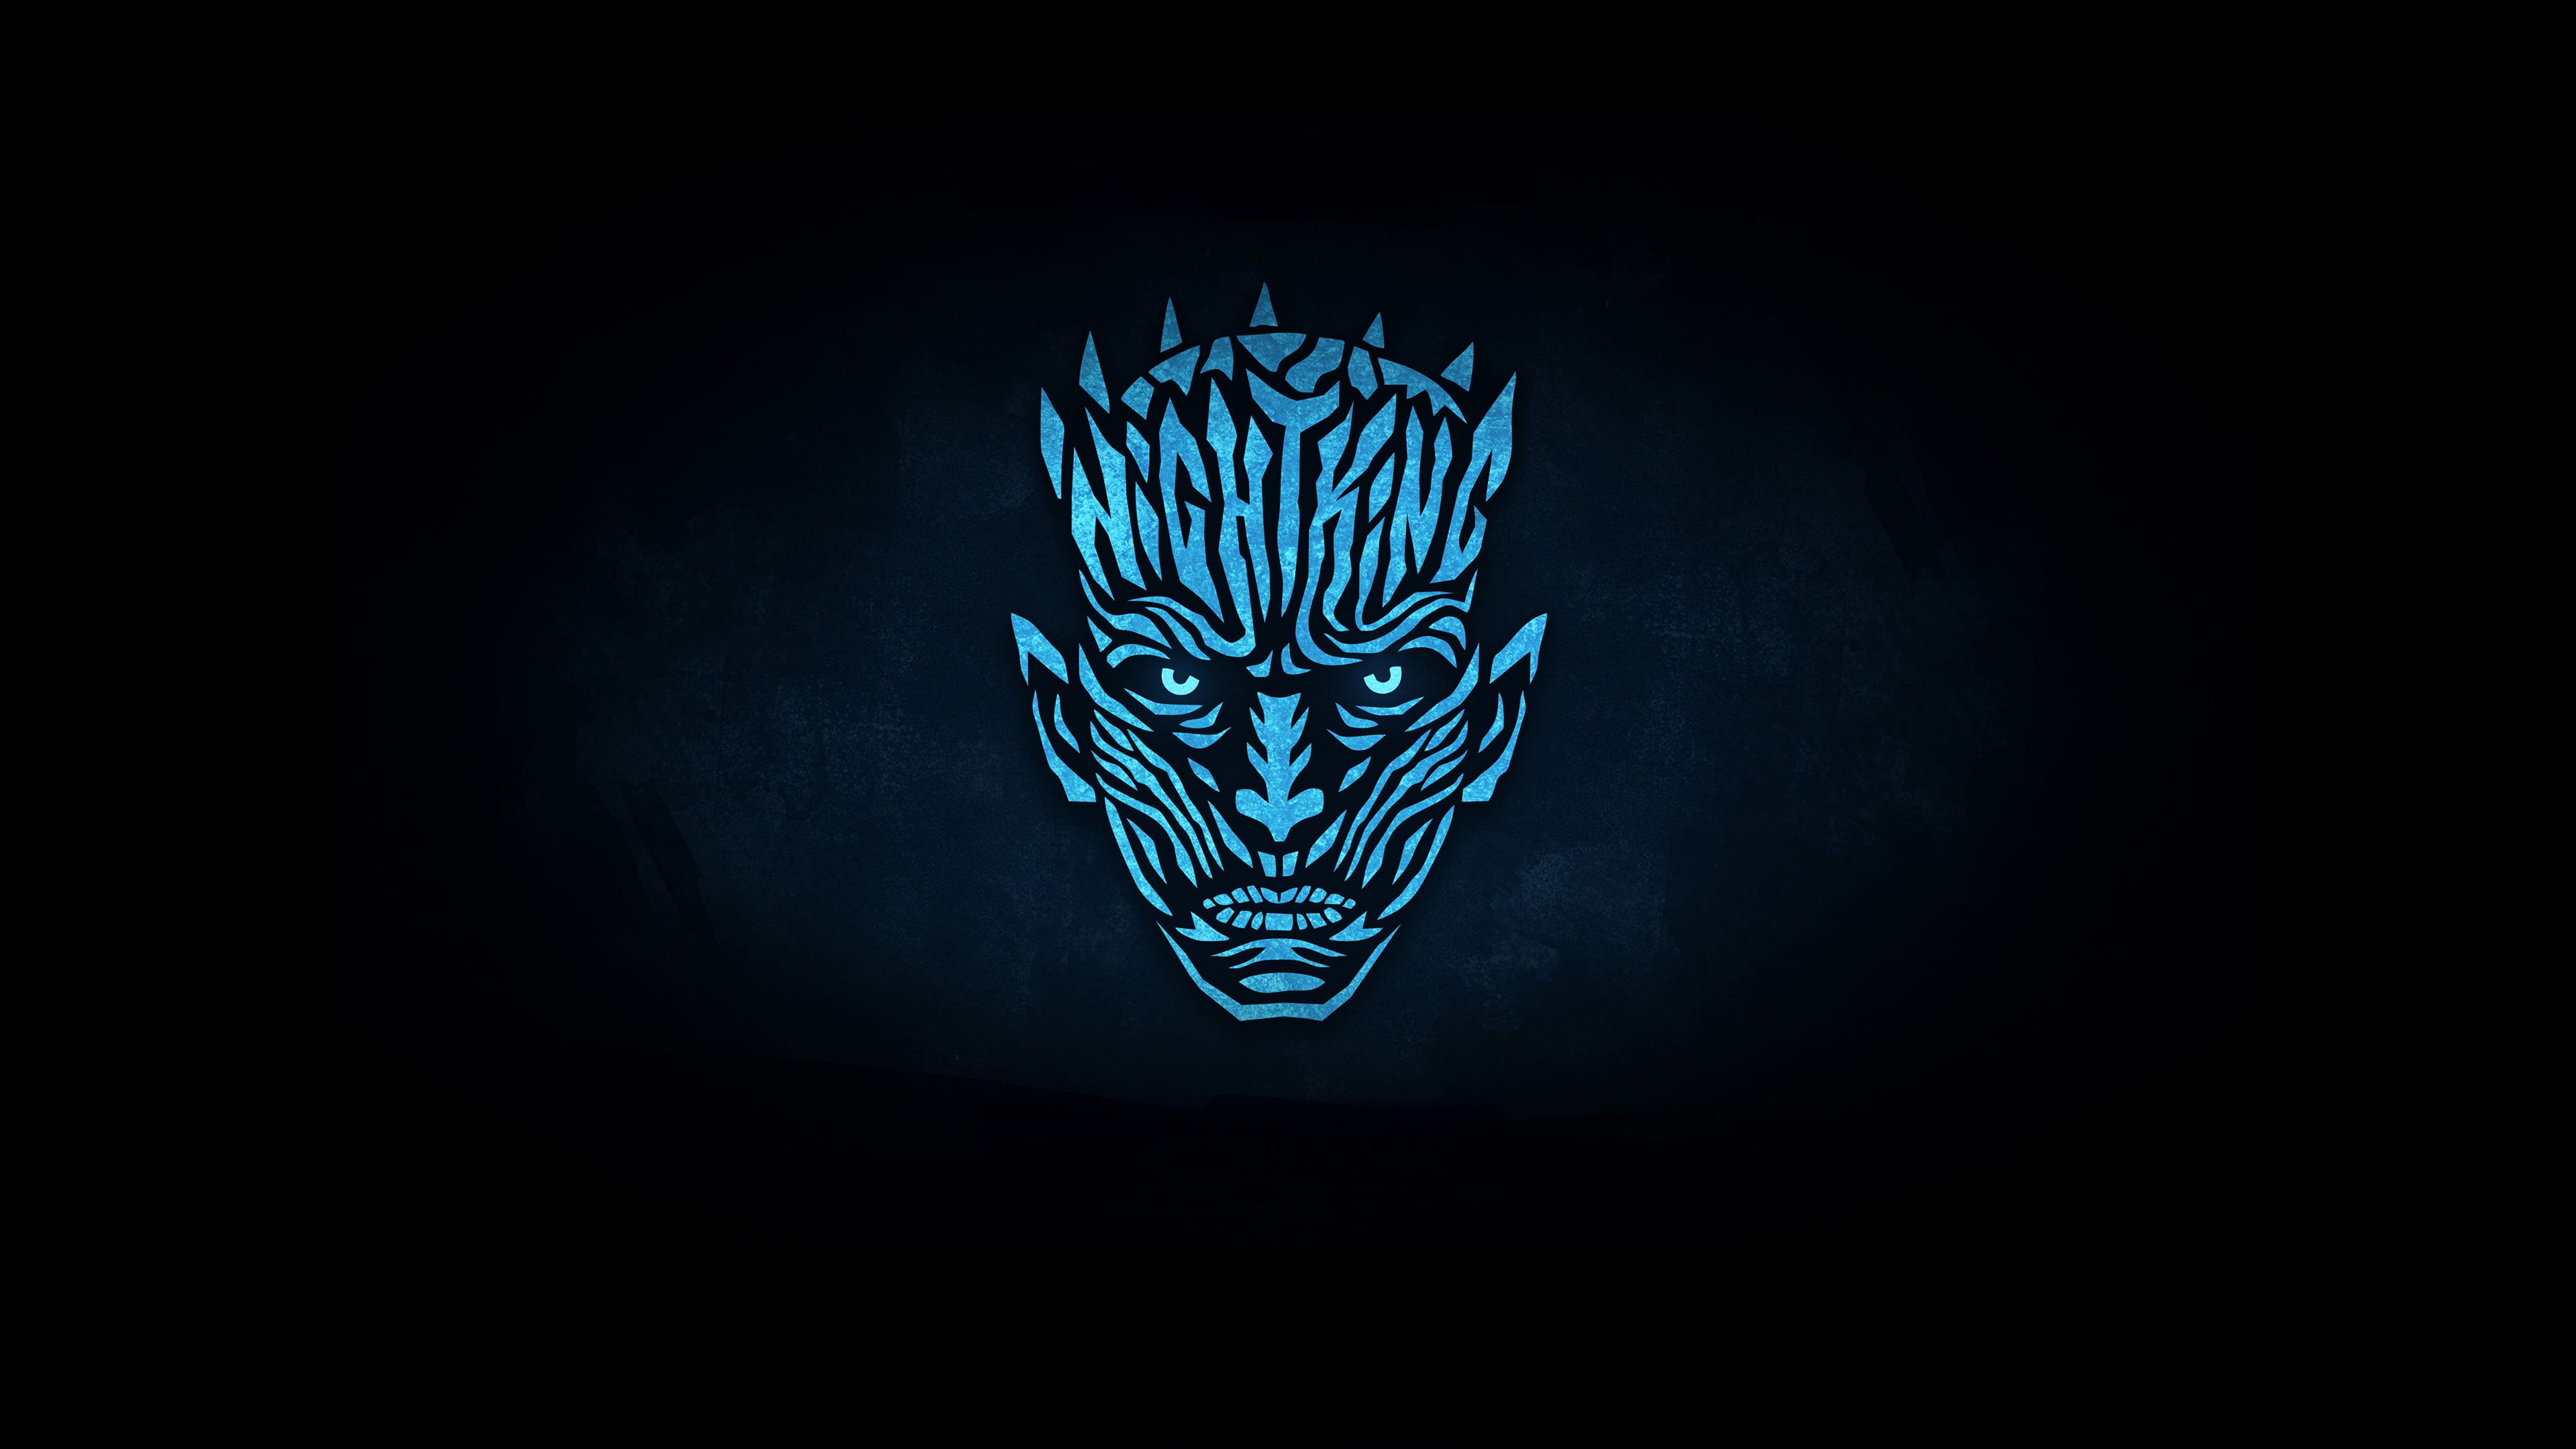 TV Show Game Of Thrones #Minimalist Night King (Game of Thrones) K # wallpaper #hdwallpaper #desktop. Wallpaper gallery, Wallpaper free download, HD wallpaper